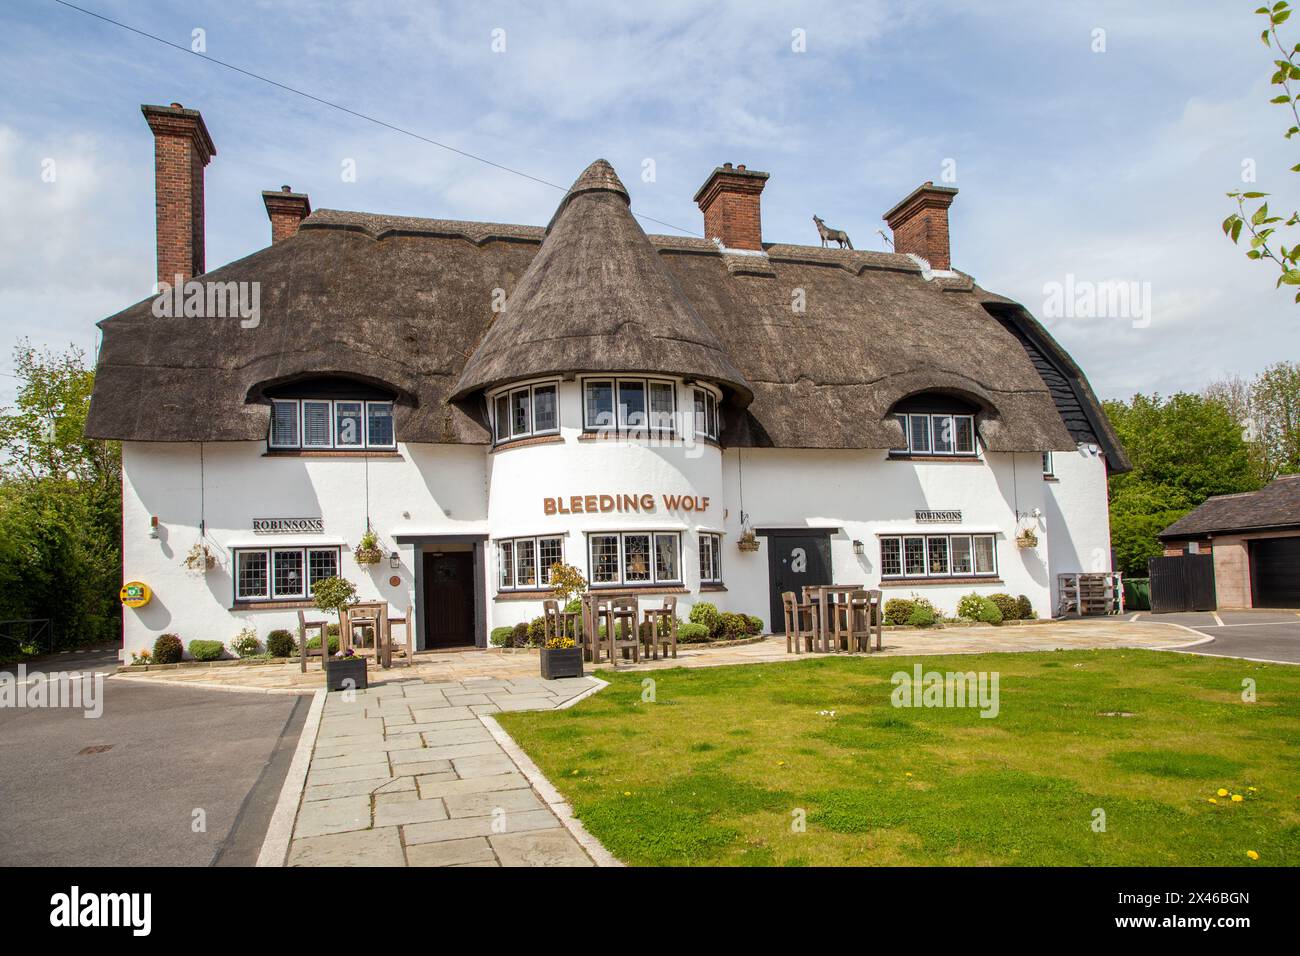 The Bleeding Wolf a thatched roofed  country pub and country inn in the Cheshire village of Scholar Green near Congleton , a Robinsons brewery pub Stock Photo